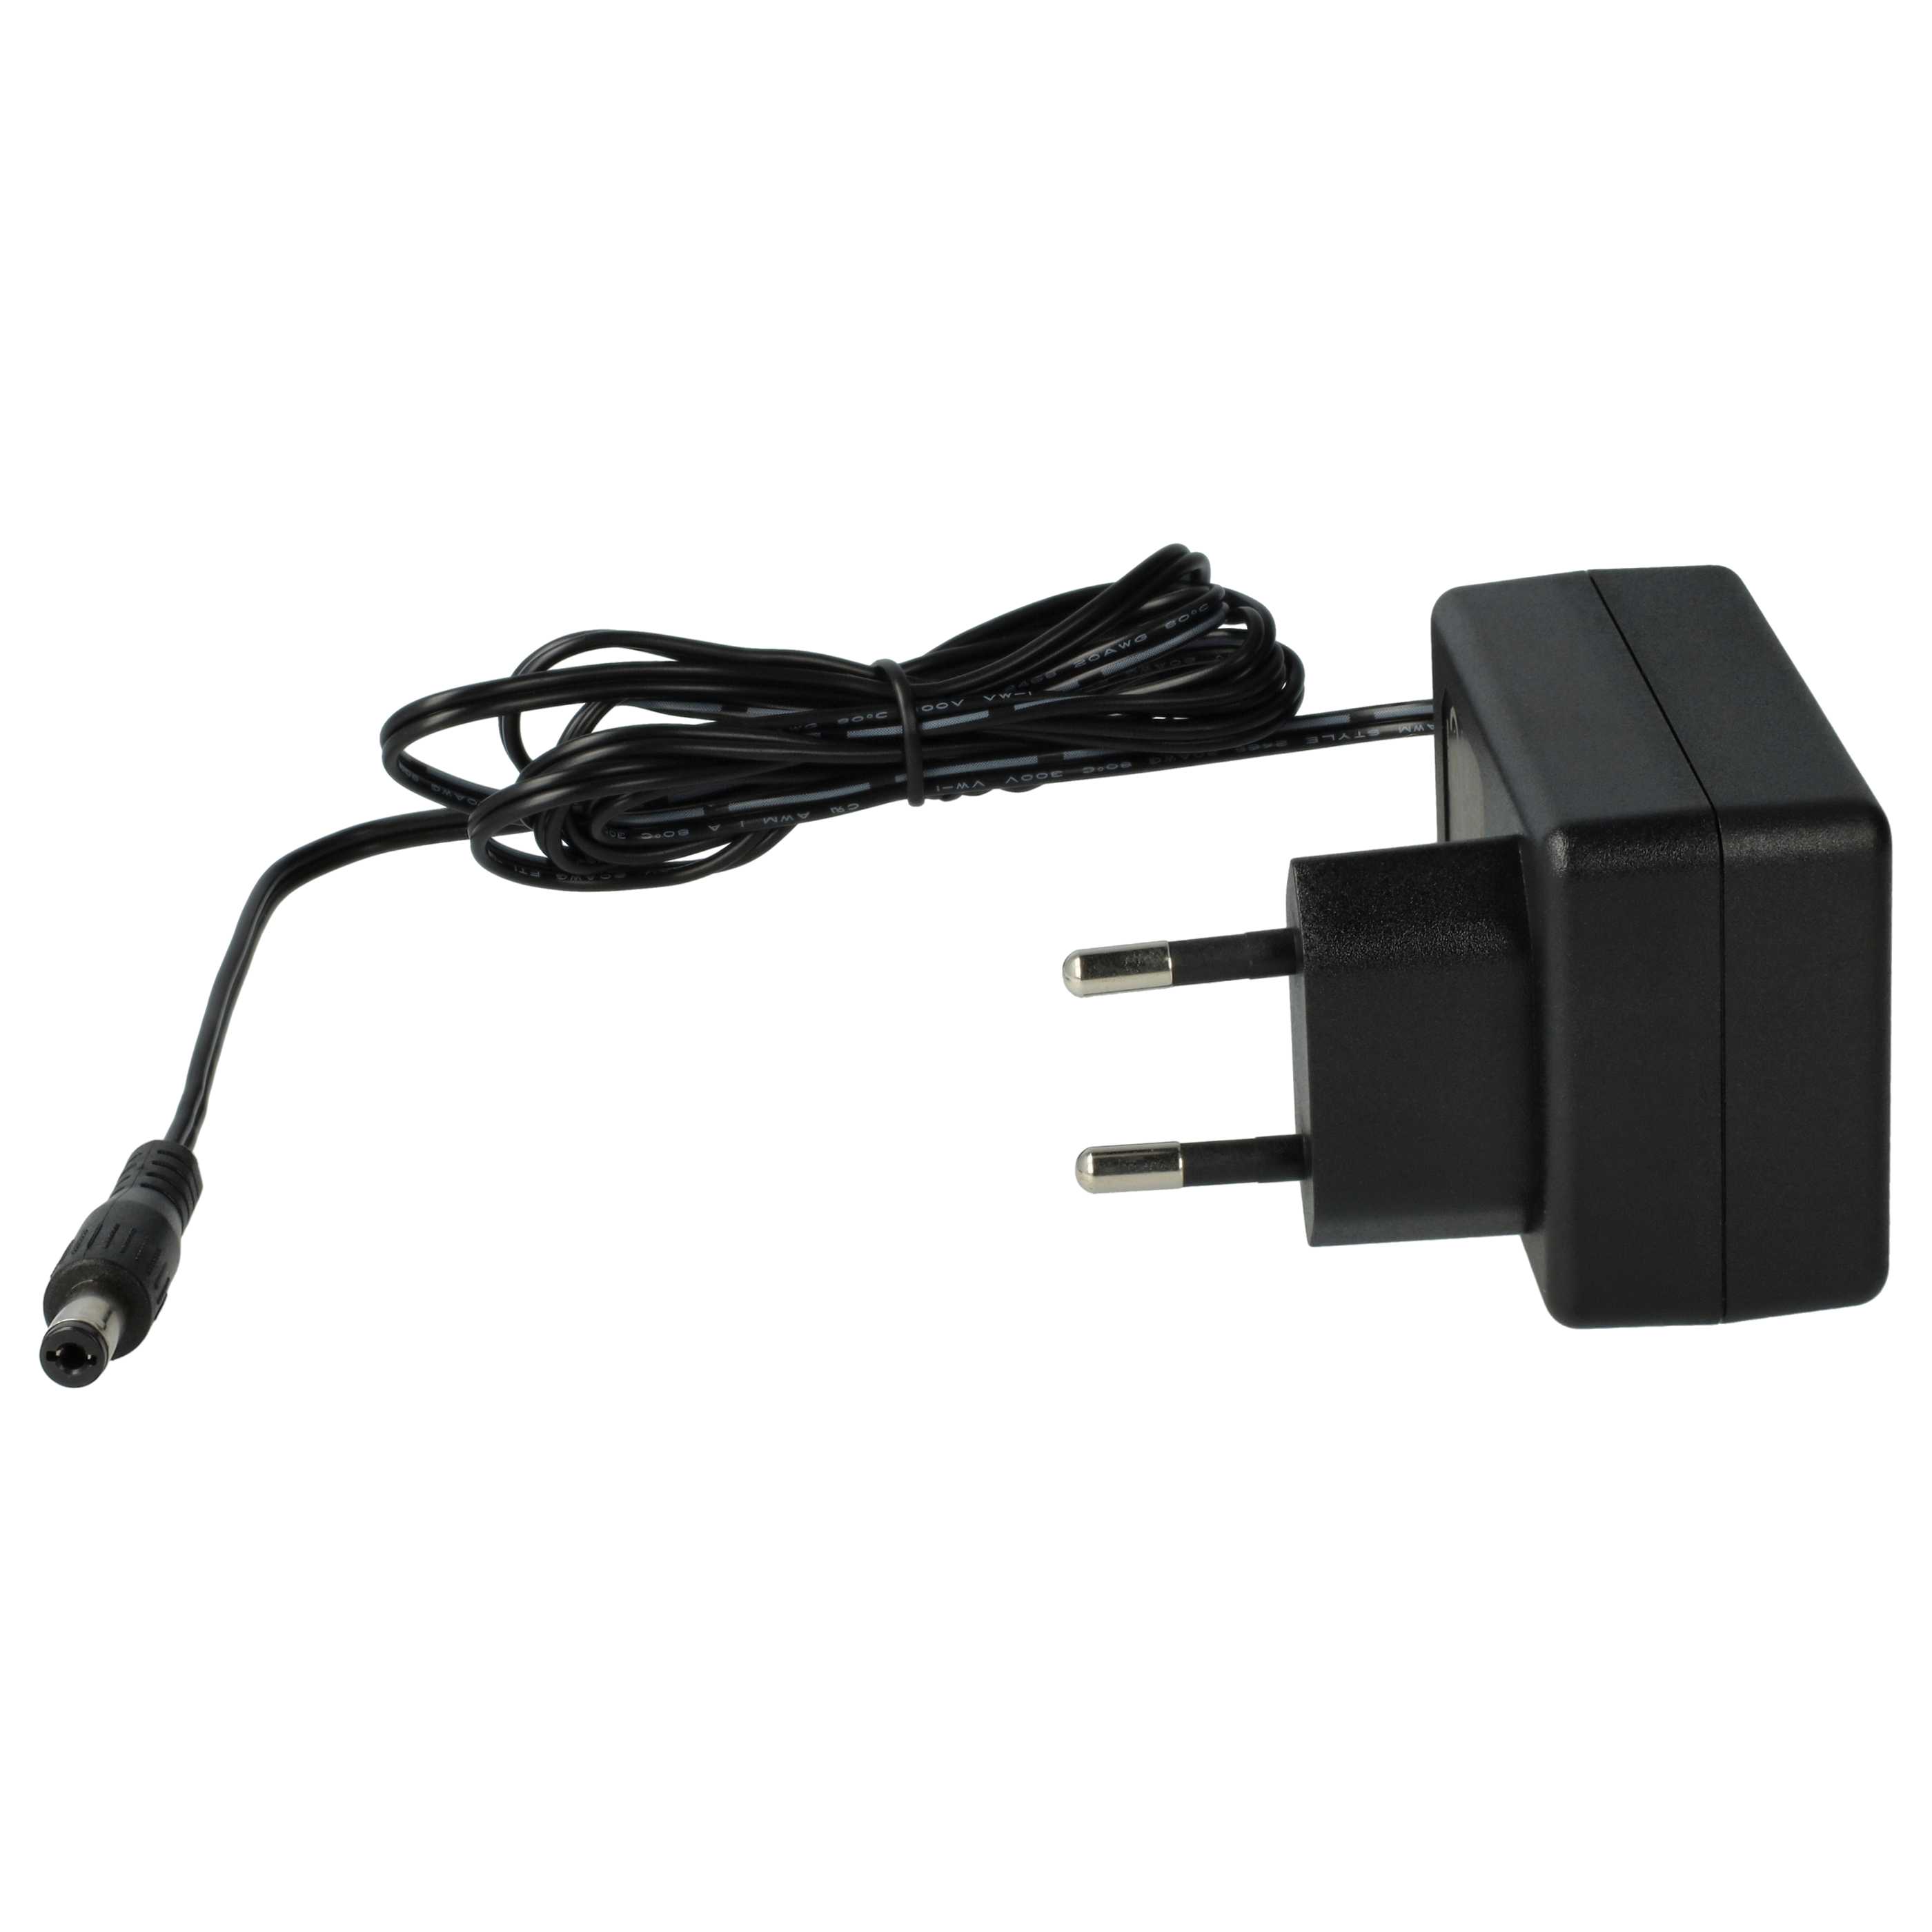 Mains Power Adapter replaces Fanvil PSU-520 for Yealink Landline Telephone, Home Telephone etc. - 150 cm